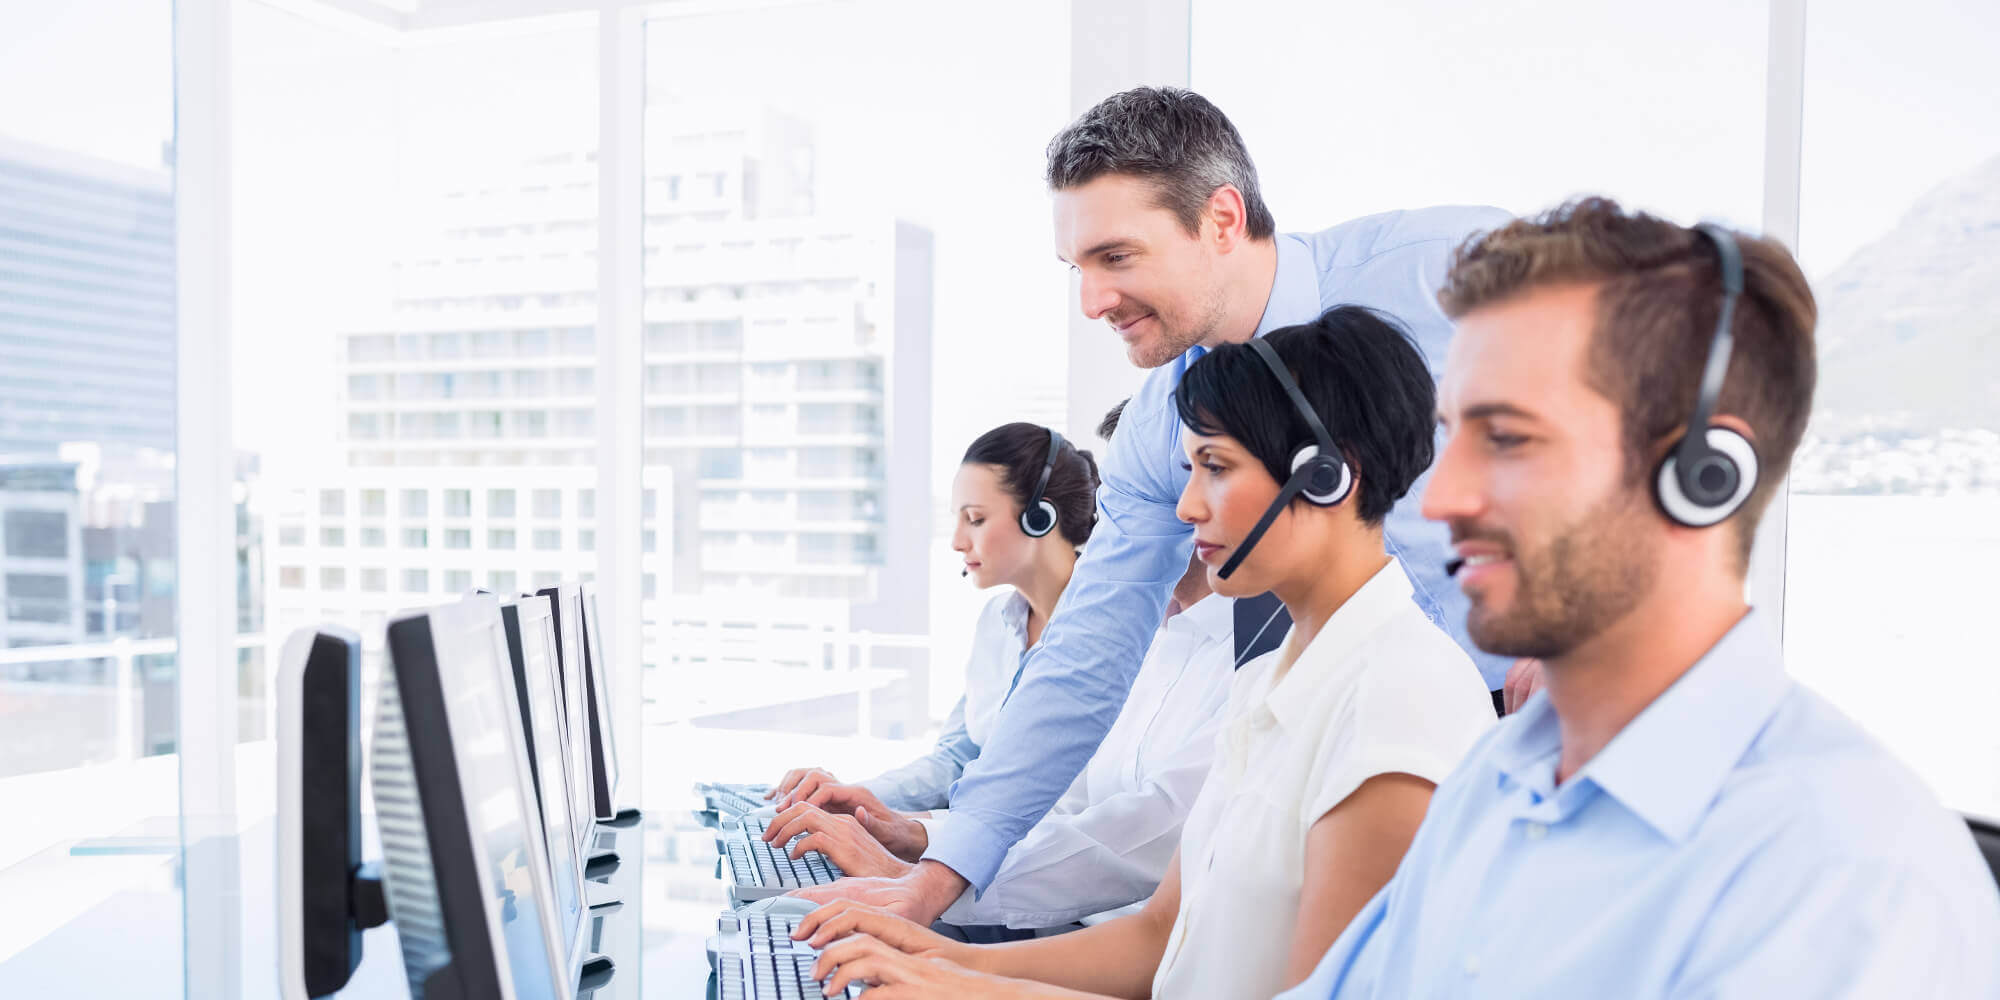 Call center employees wearing VoIP headsets and working on computers